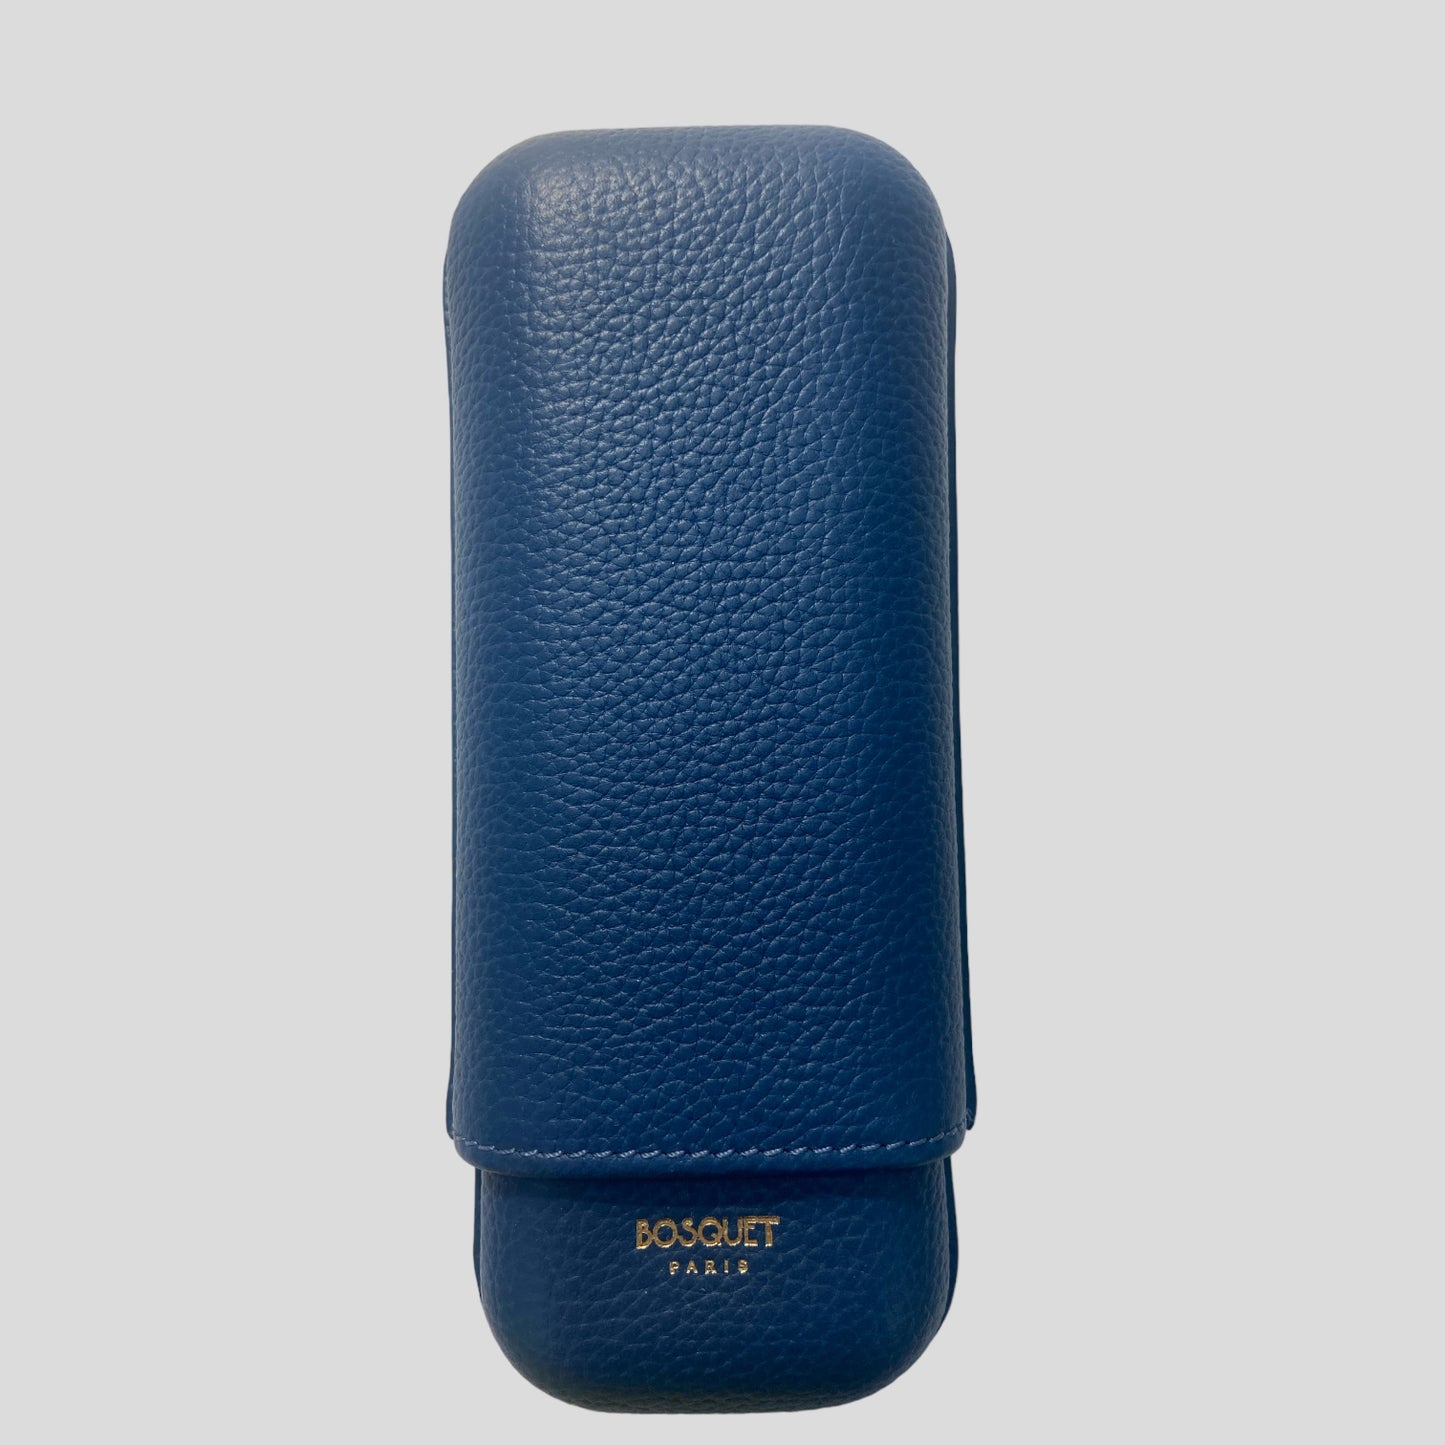 Grained Calf Leather Case For 2 -  Blue Lapis